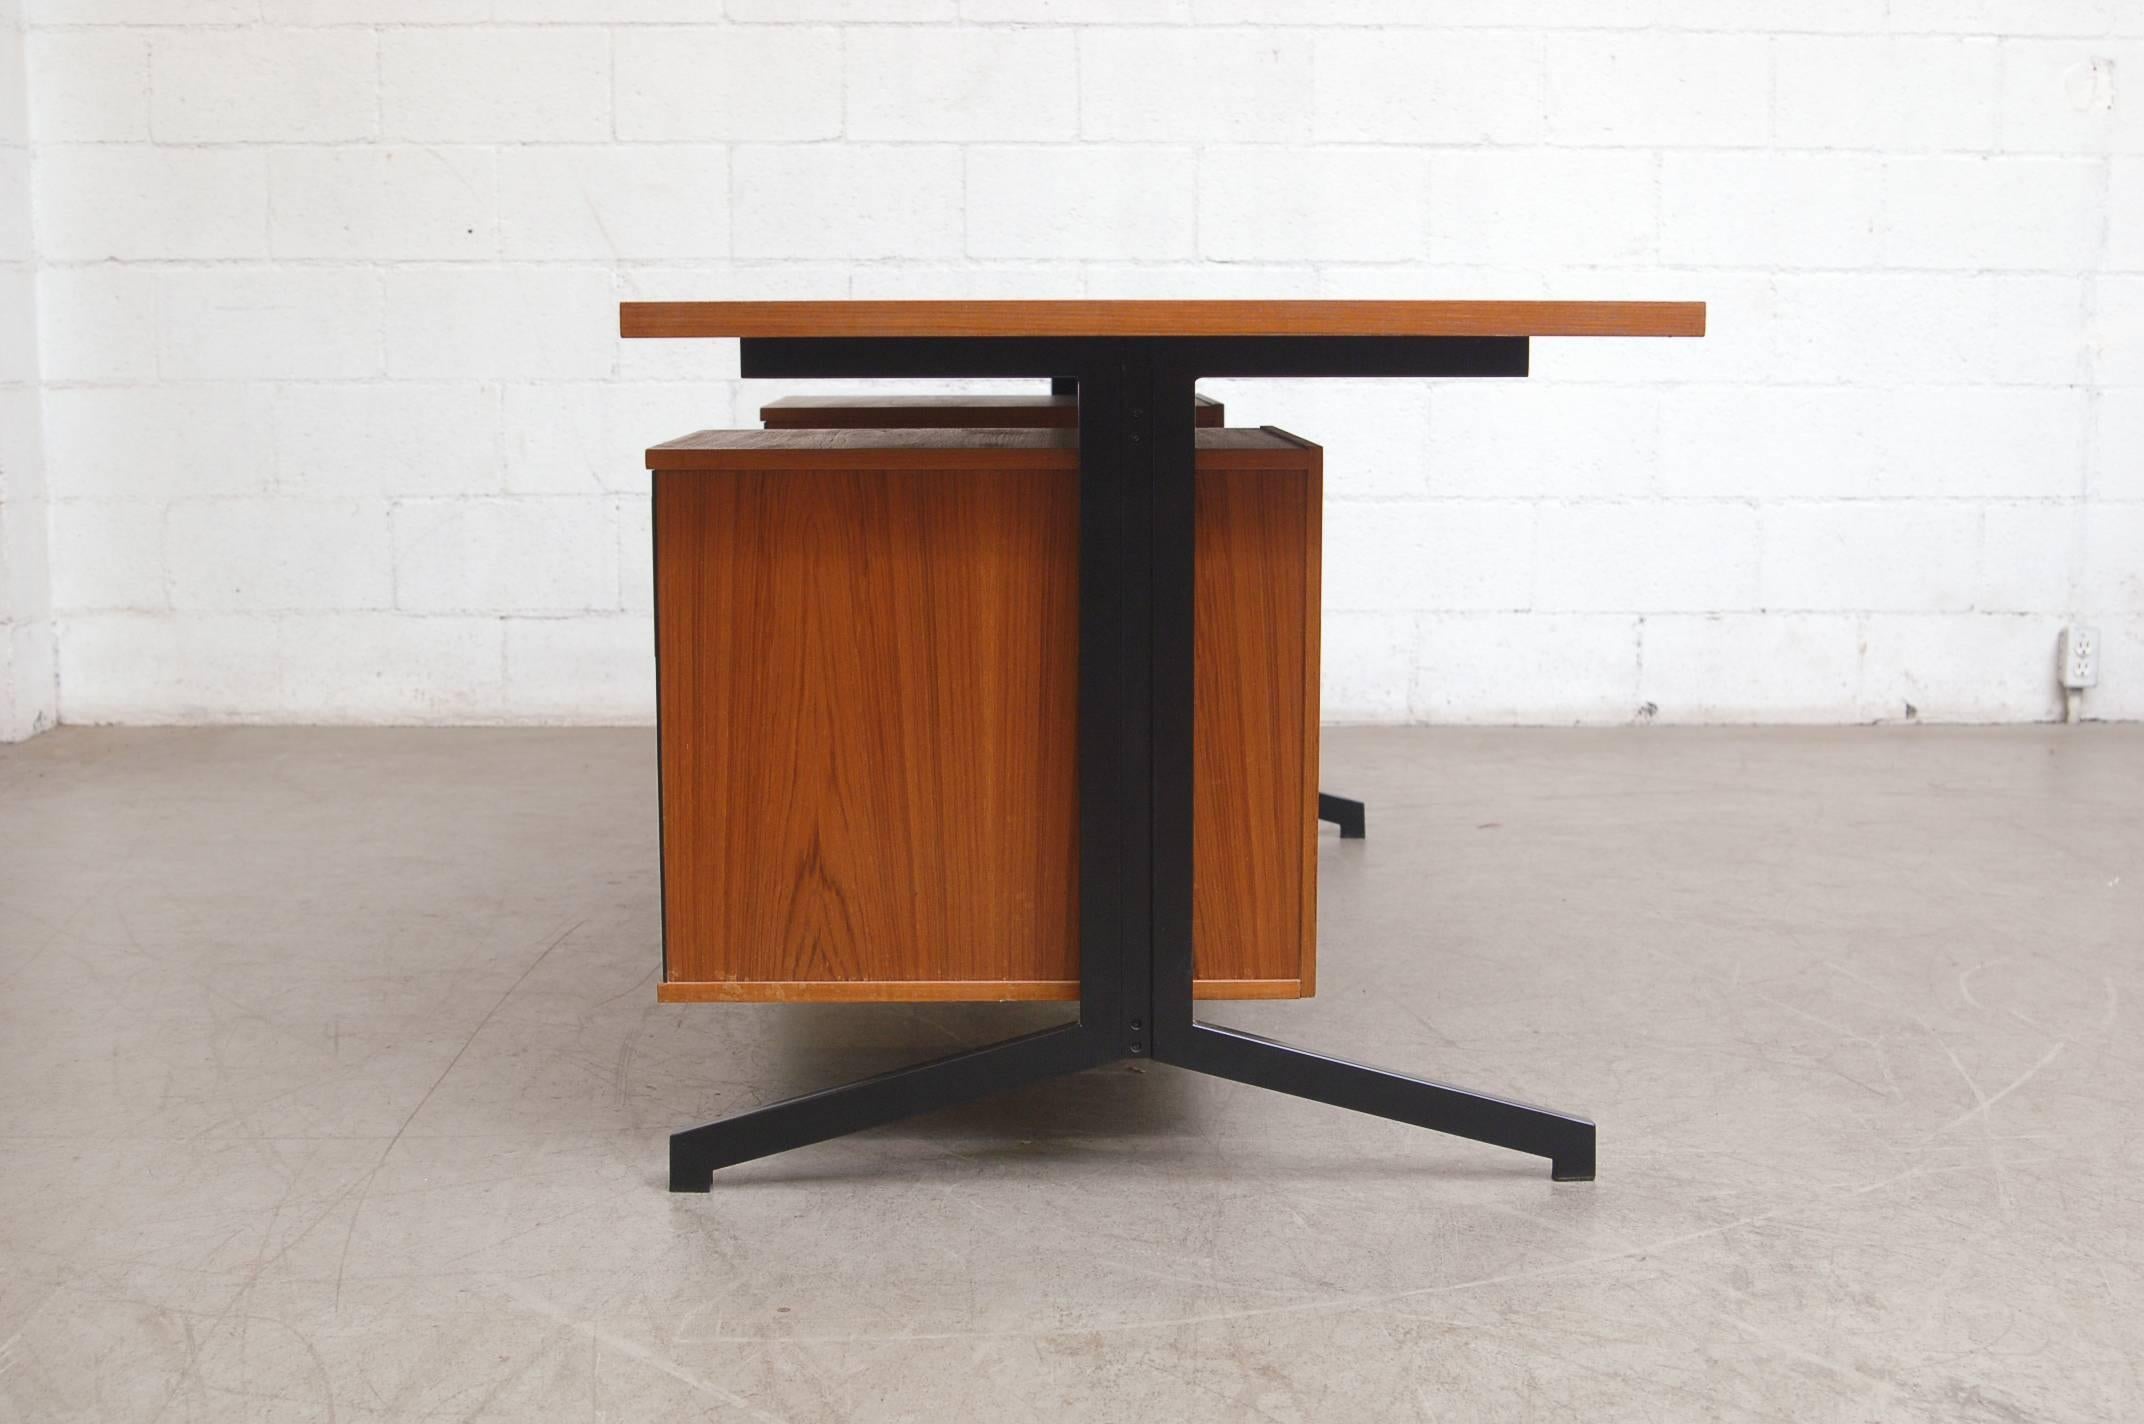 Large teak executive desk with Prouve style legs, black enameled metal frame and six drawers.